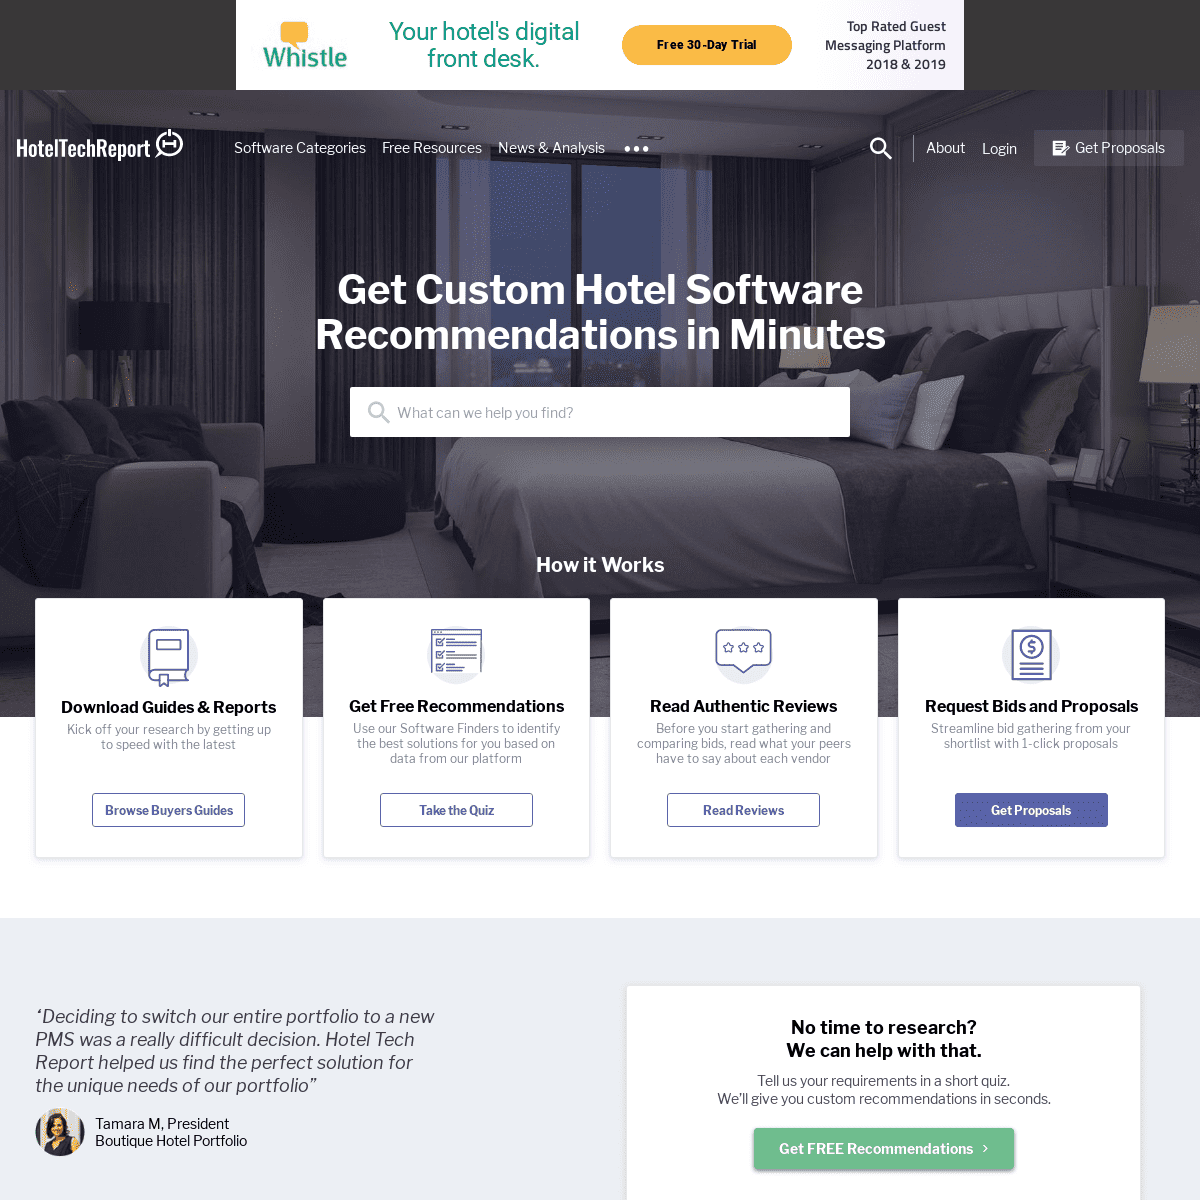 A complete backup of hoteltechreport.com